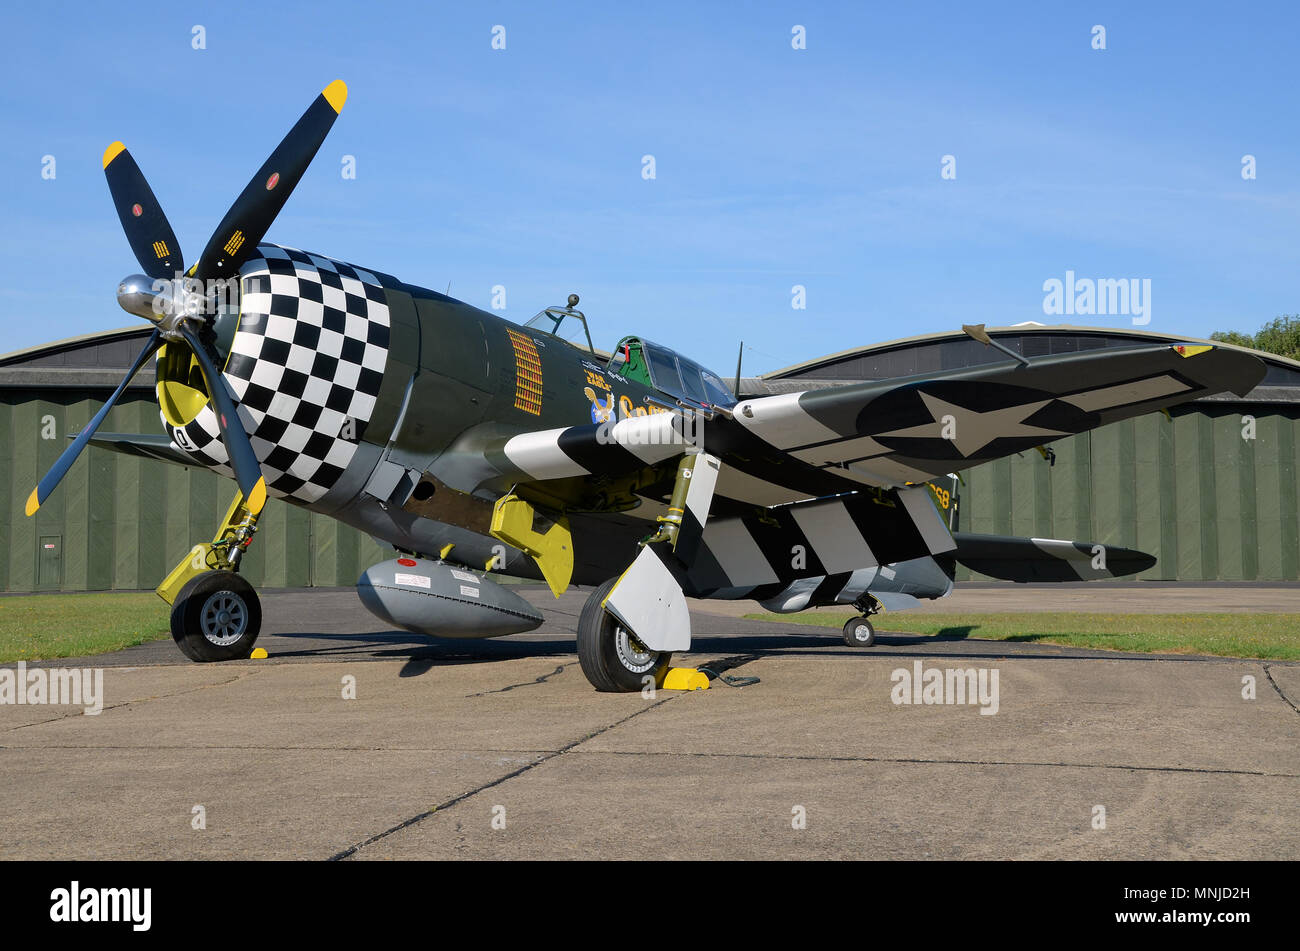 Republic P-47 Thunderbolt named Snafu War Eagle World War Two, Second World War fighter plane rolled out after painting. Checkerboard nose Stock Photo